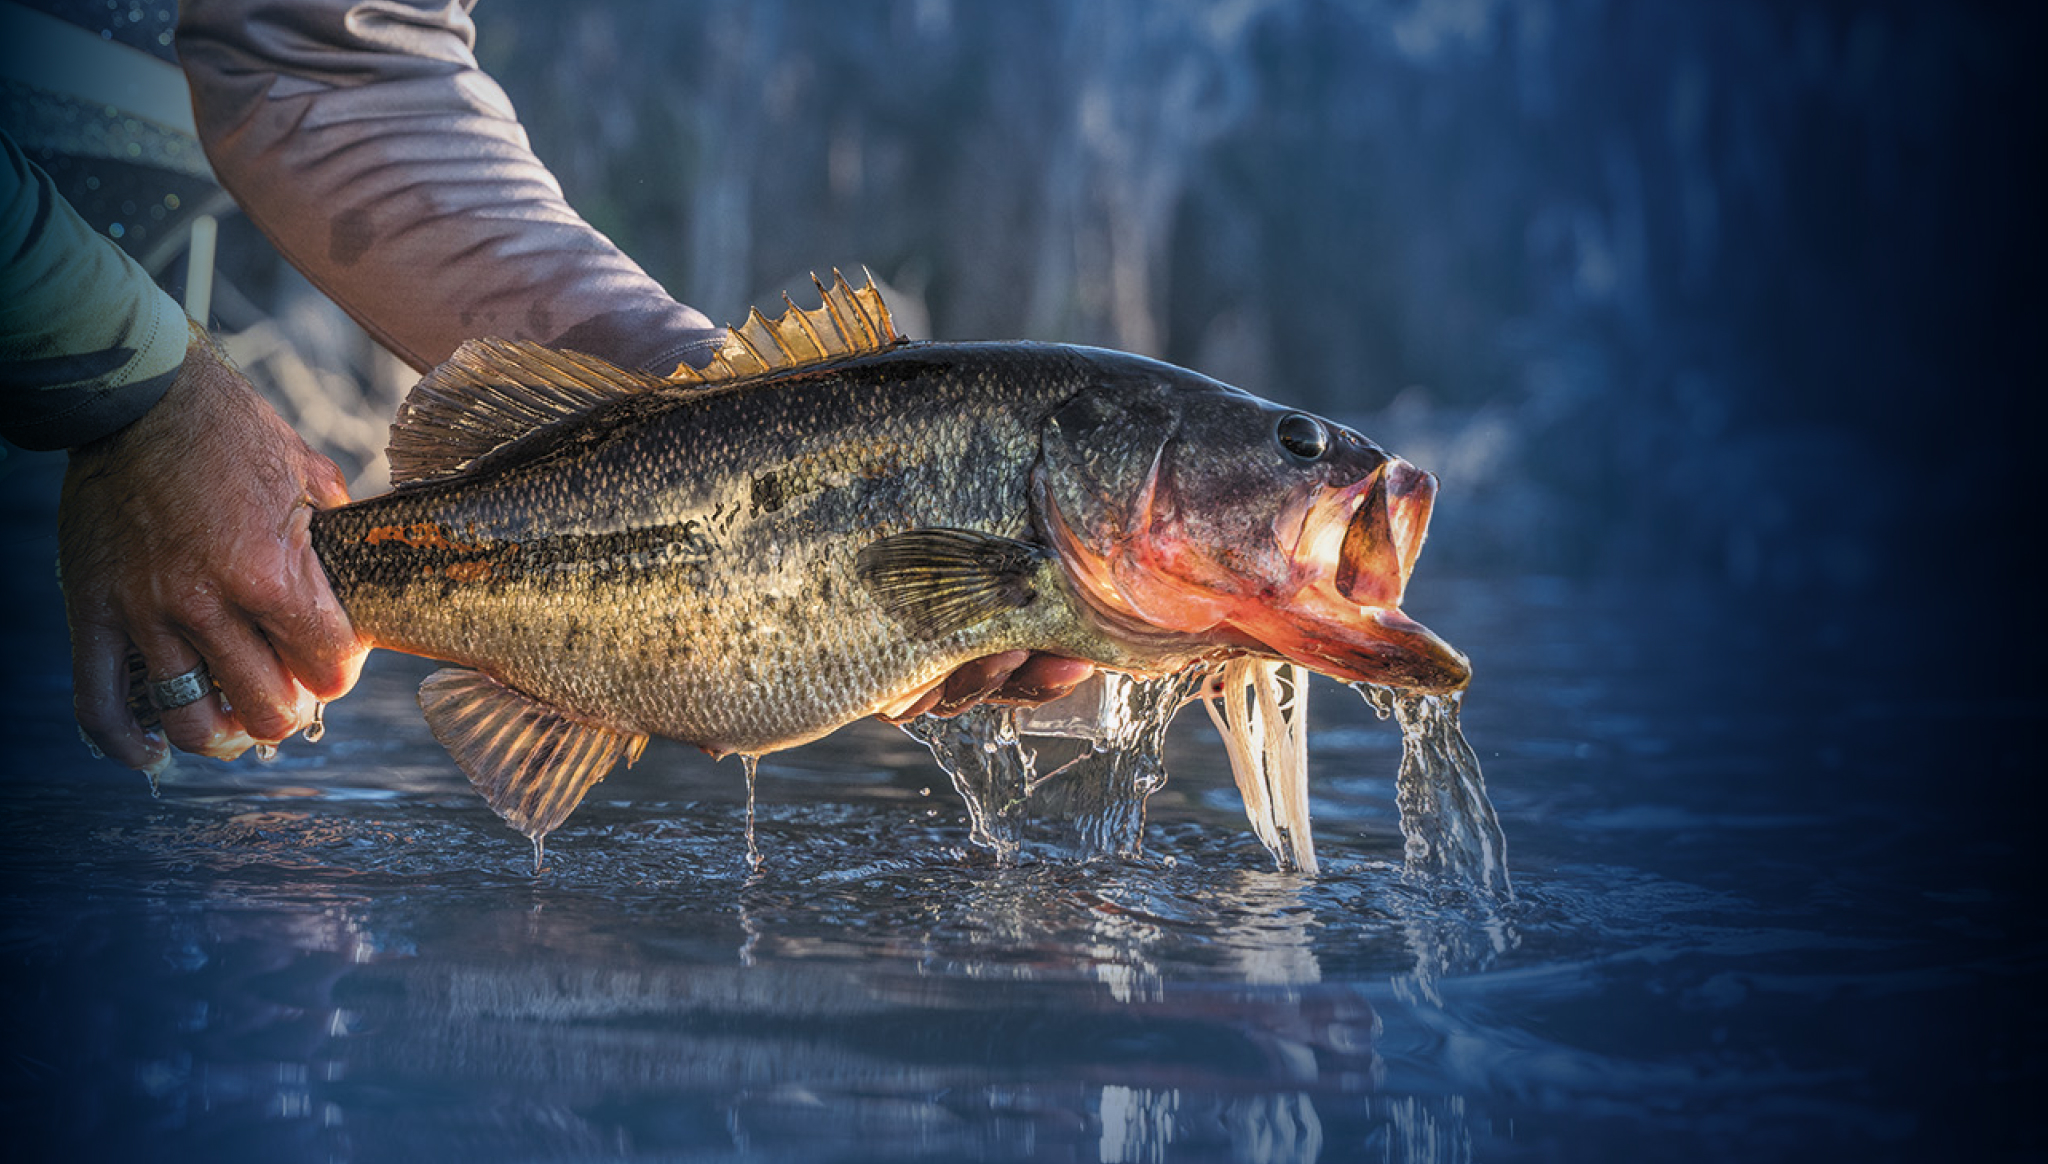 Bass Pro Shops and Cabela's Spring Fishing Classic is stocked with